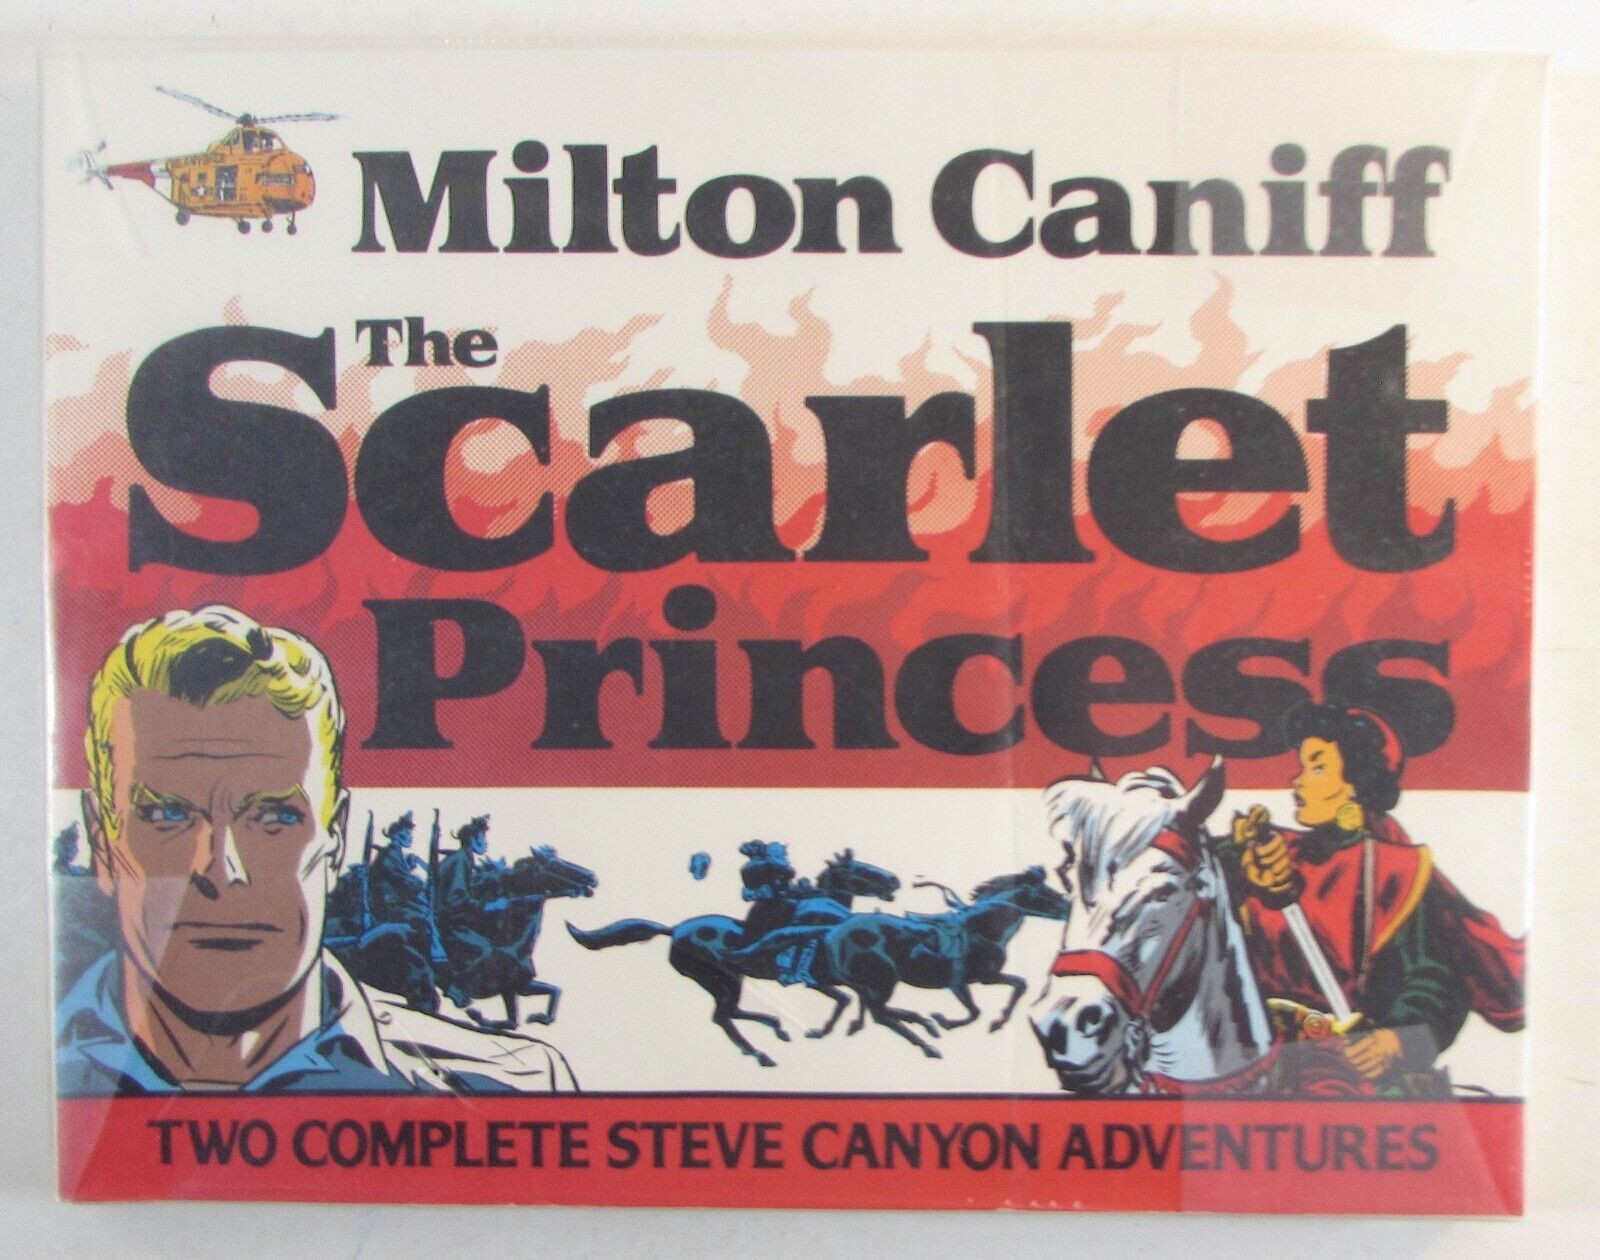 1989 Milton Caniff SCARLET PRINCESS Steve Canyon Adventures #23 192 Pages TPB